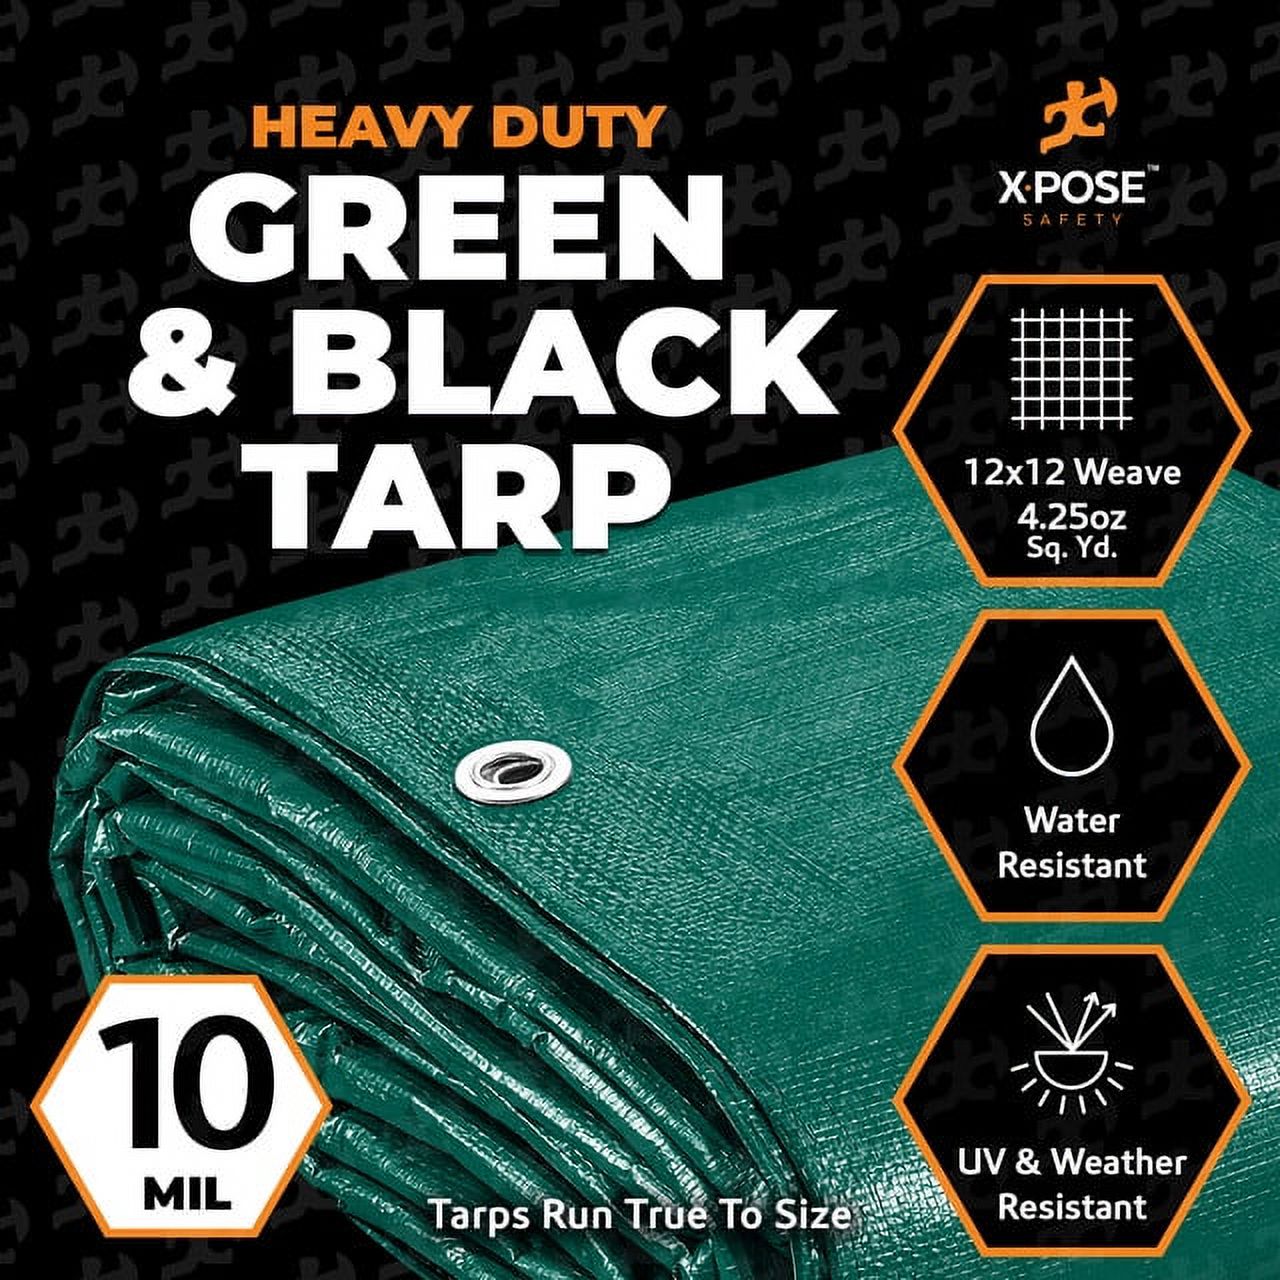 Heavy Duty Poly Tarp 30 Feet x 50 Feet 10 Mil Thick Waterproof, UV Blocking Protective Cover - Reversible Green and Black - Laminated Coating - Rustproof Grommets - by Xpose Safety - image 2 of 8